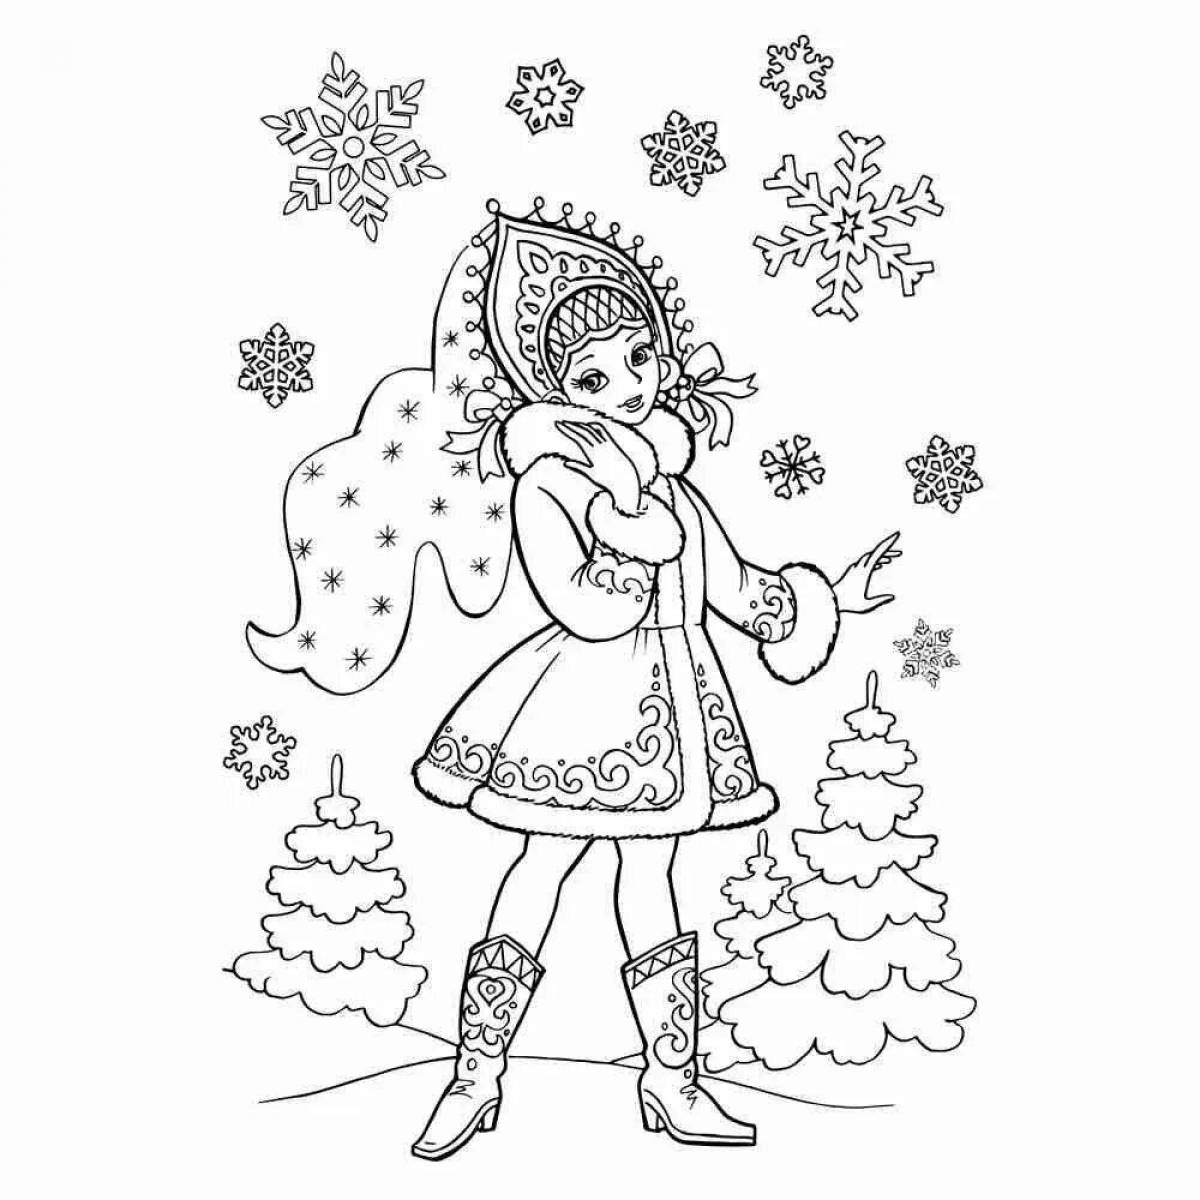 Bright coloring drawing snow maiden